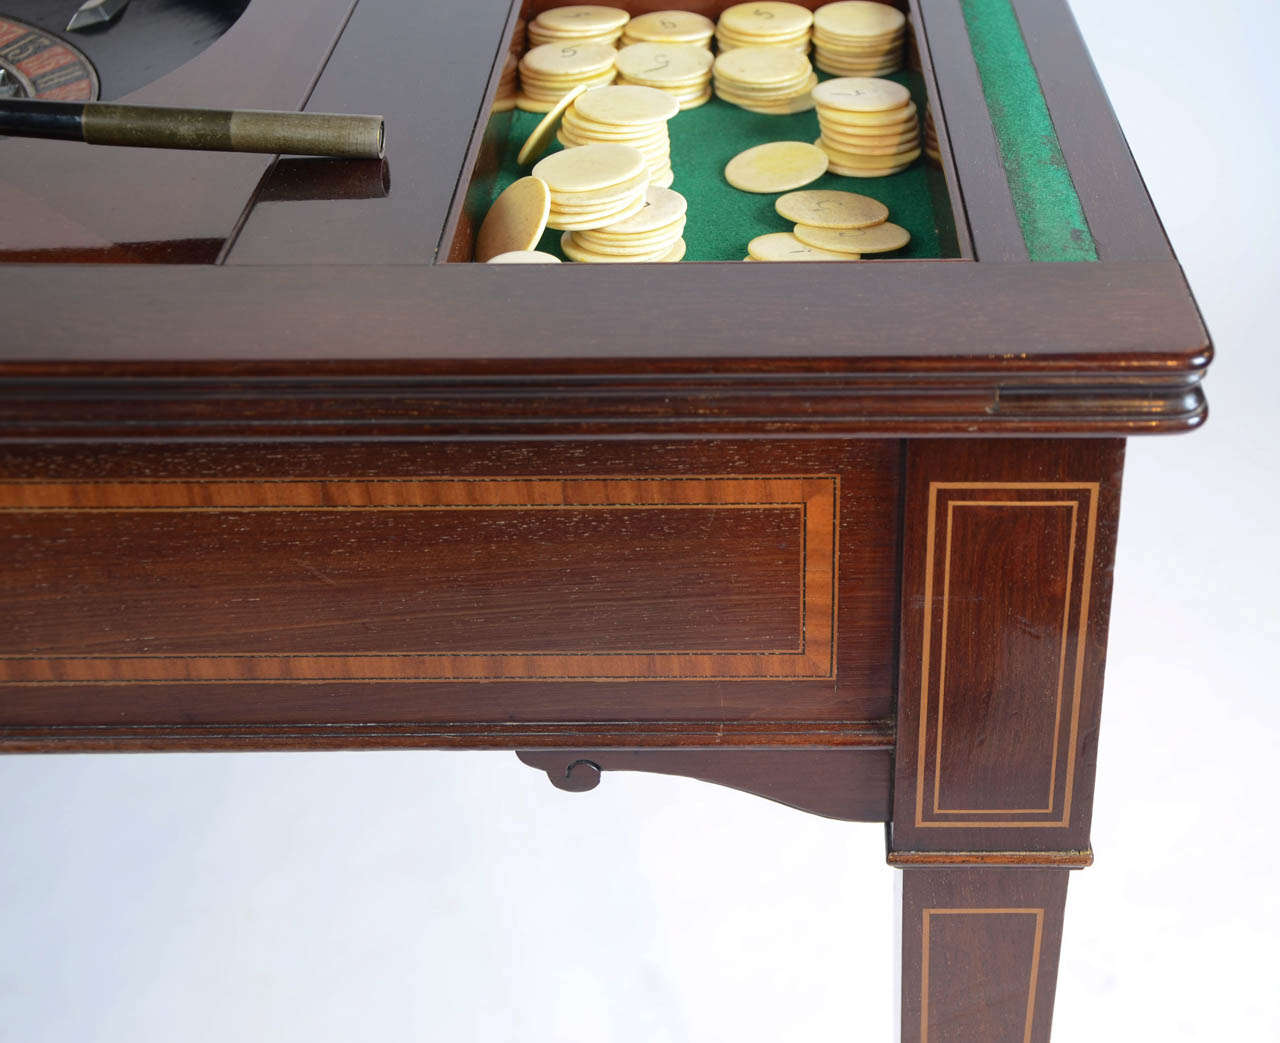 British The Edwardian King's Roulette, Card and Games Table, mahogany c.1908